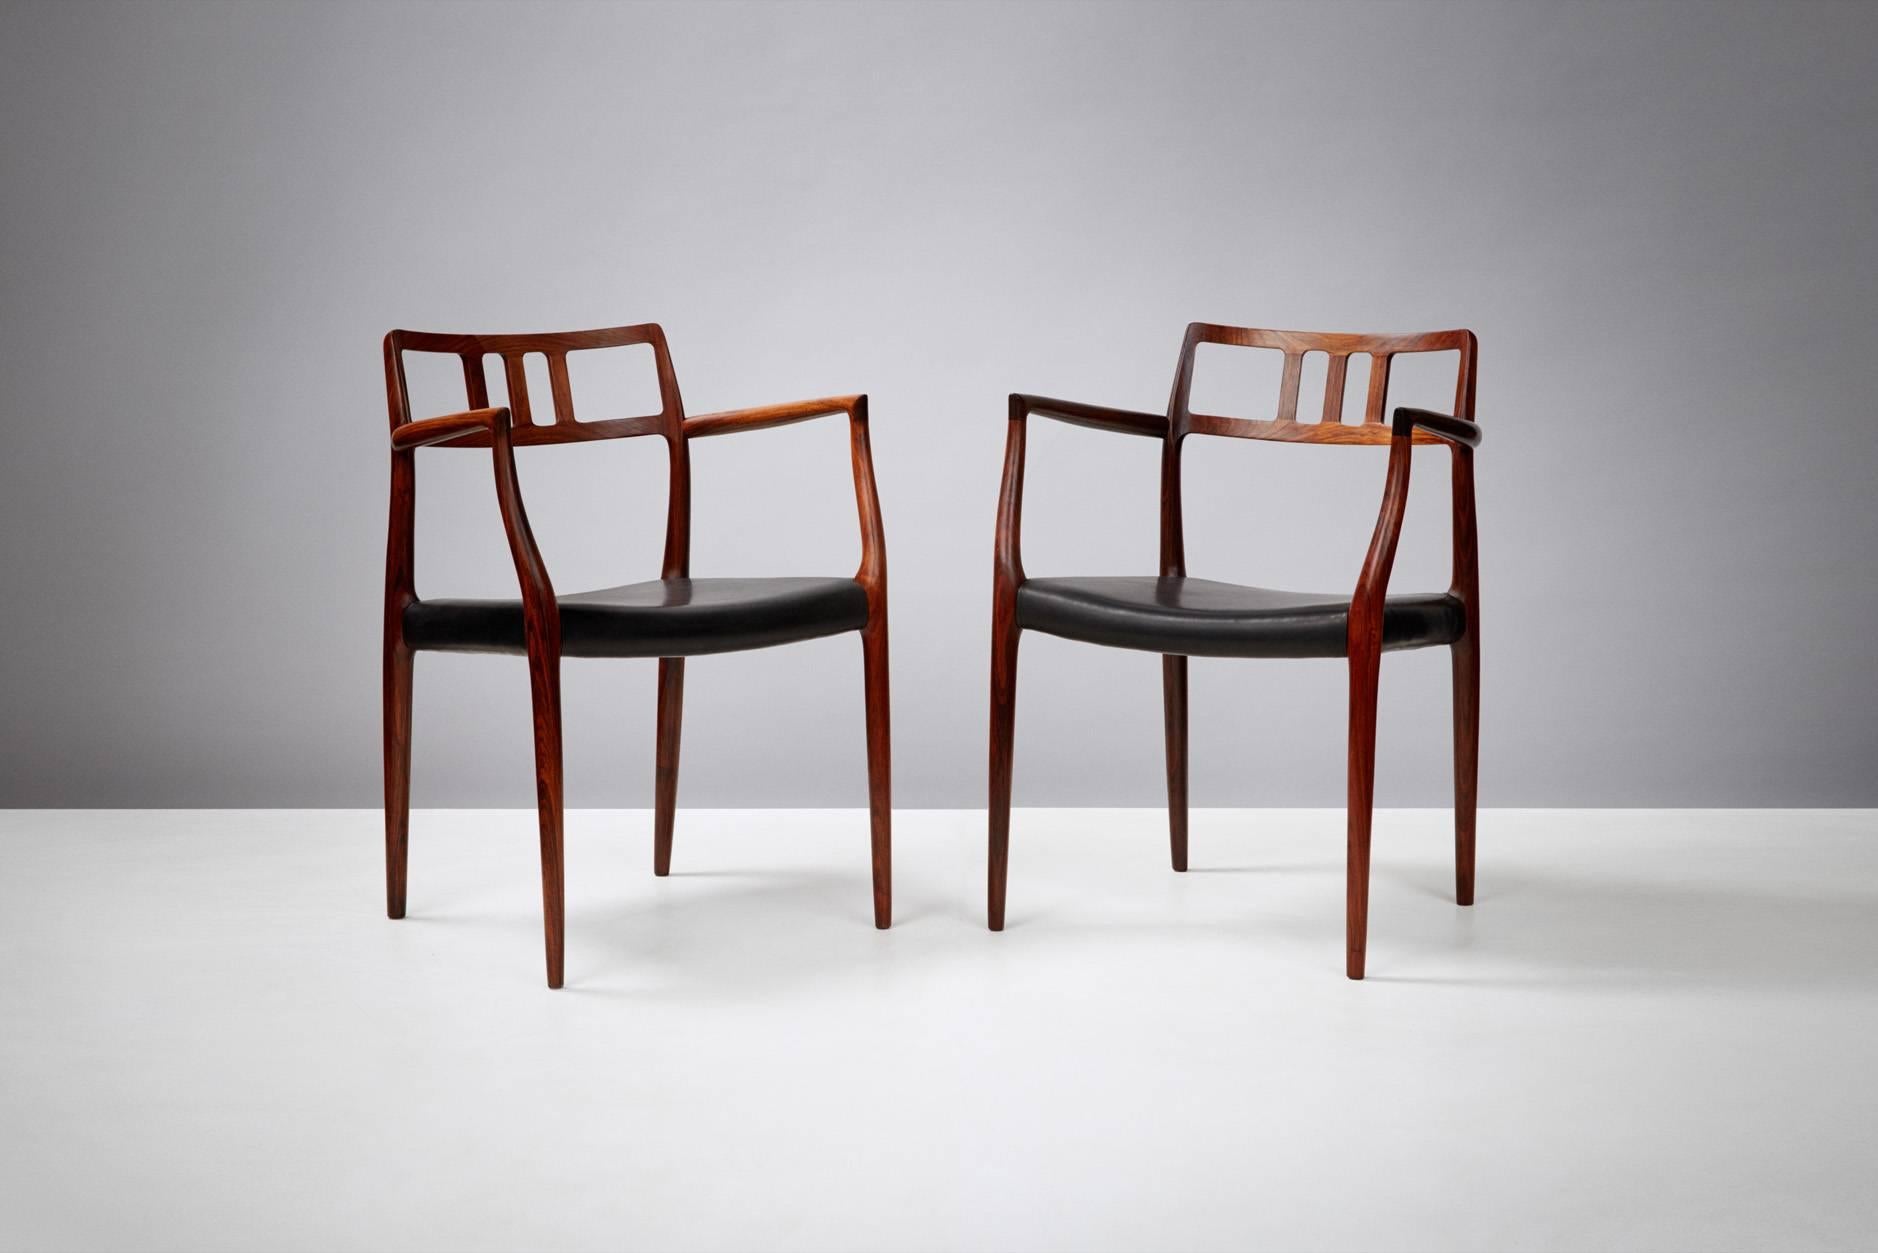 Pair of Model 64 rosewood armchairs produced by J.L. Mollers Mobelfabrik, Denmark, circa 1966. Newly covered in aniline black leather.